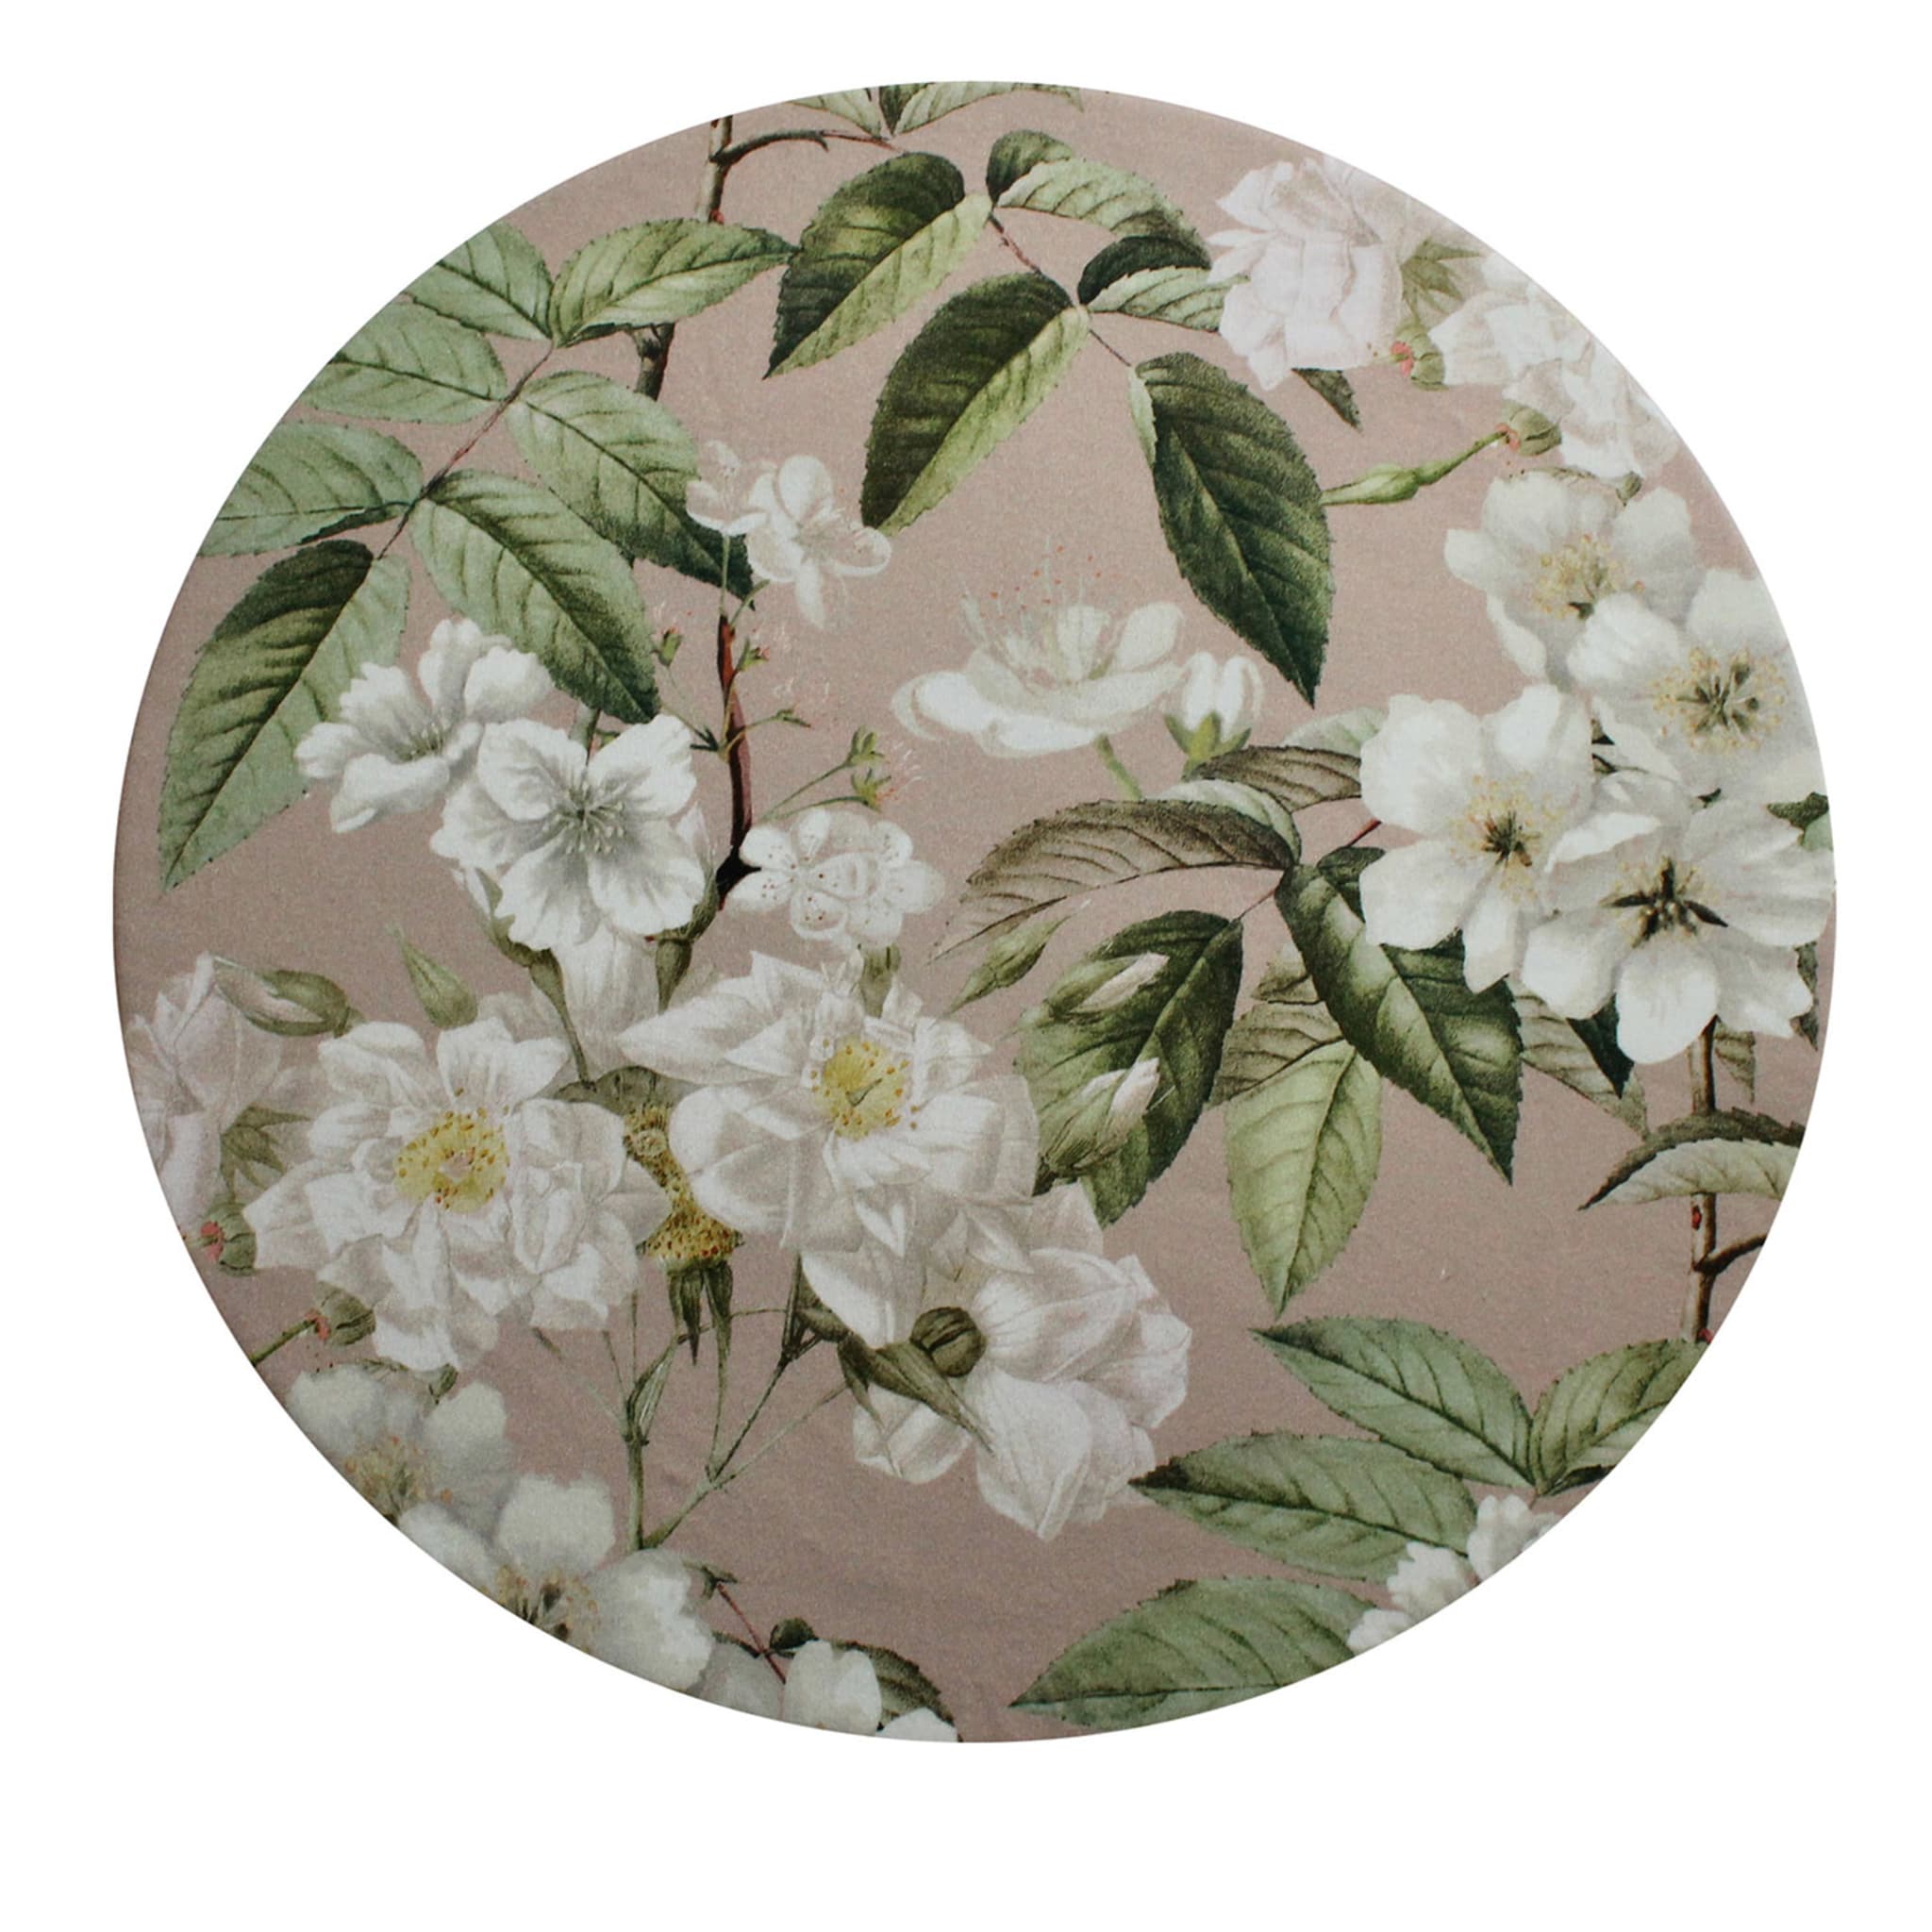 Cuffiette Flowers Round Polychrome Placemat #1 - Main view